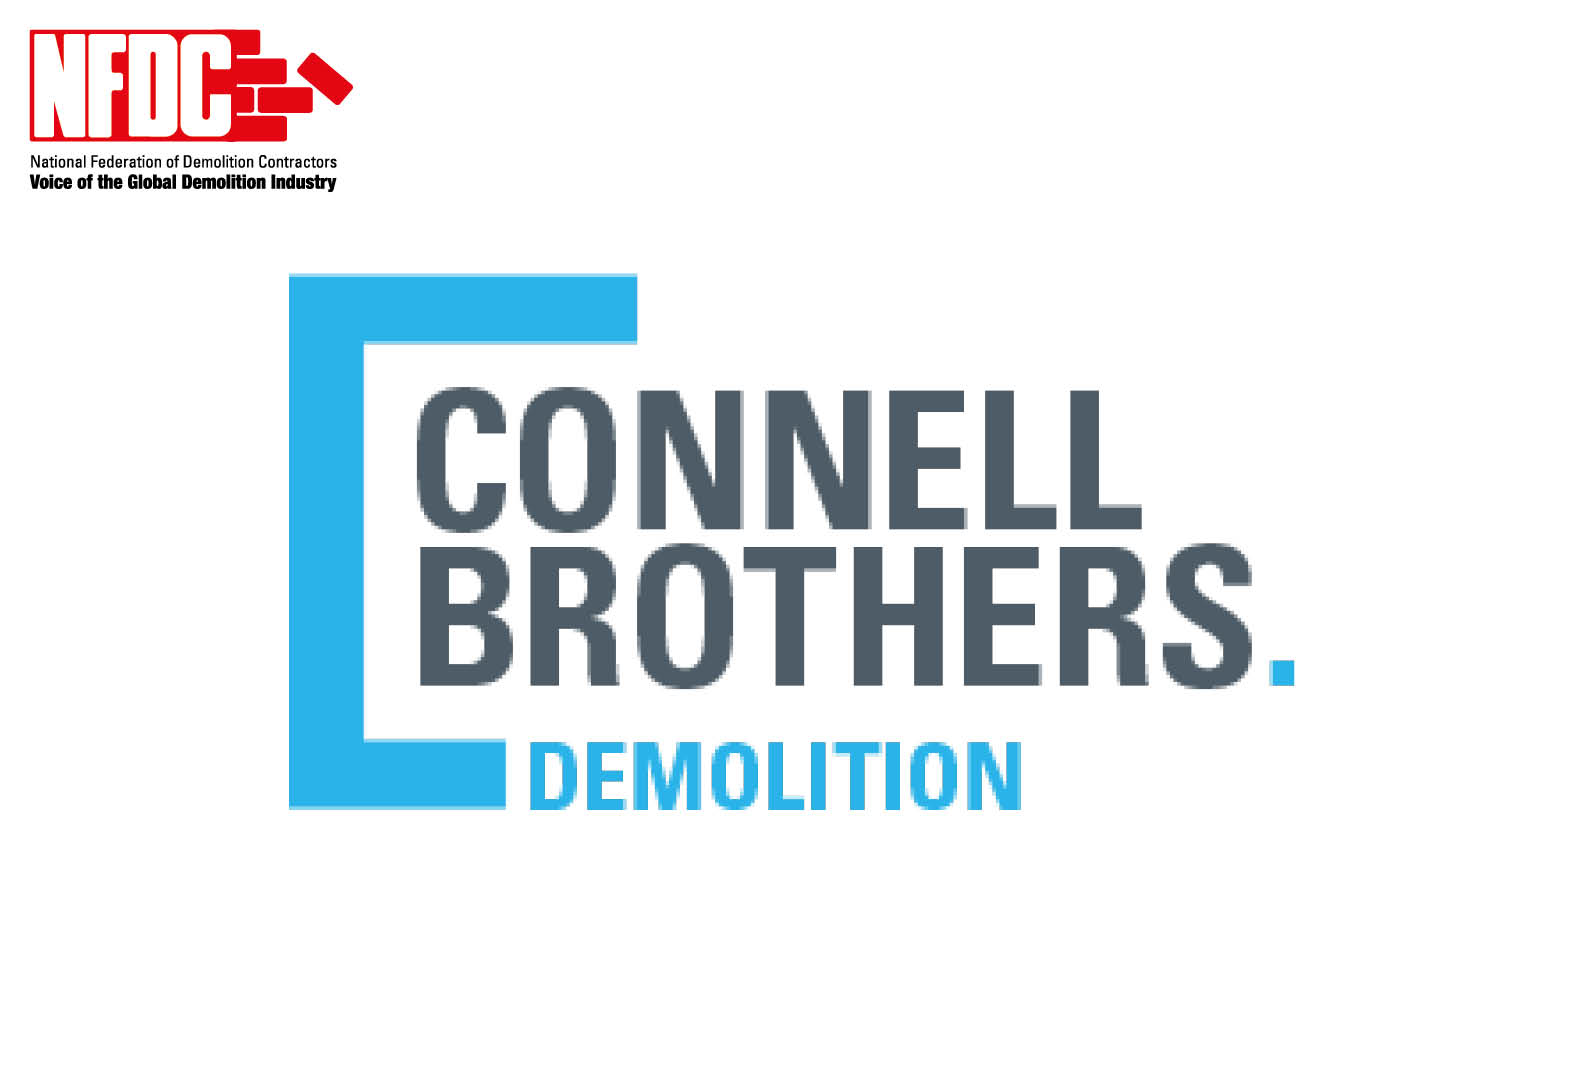 Connell Brothers Ltd